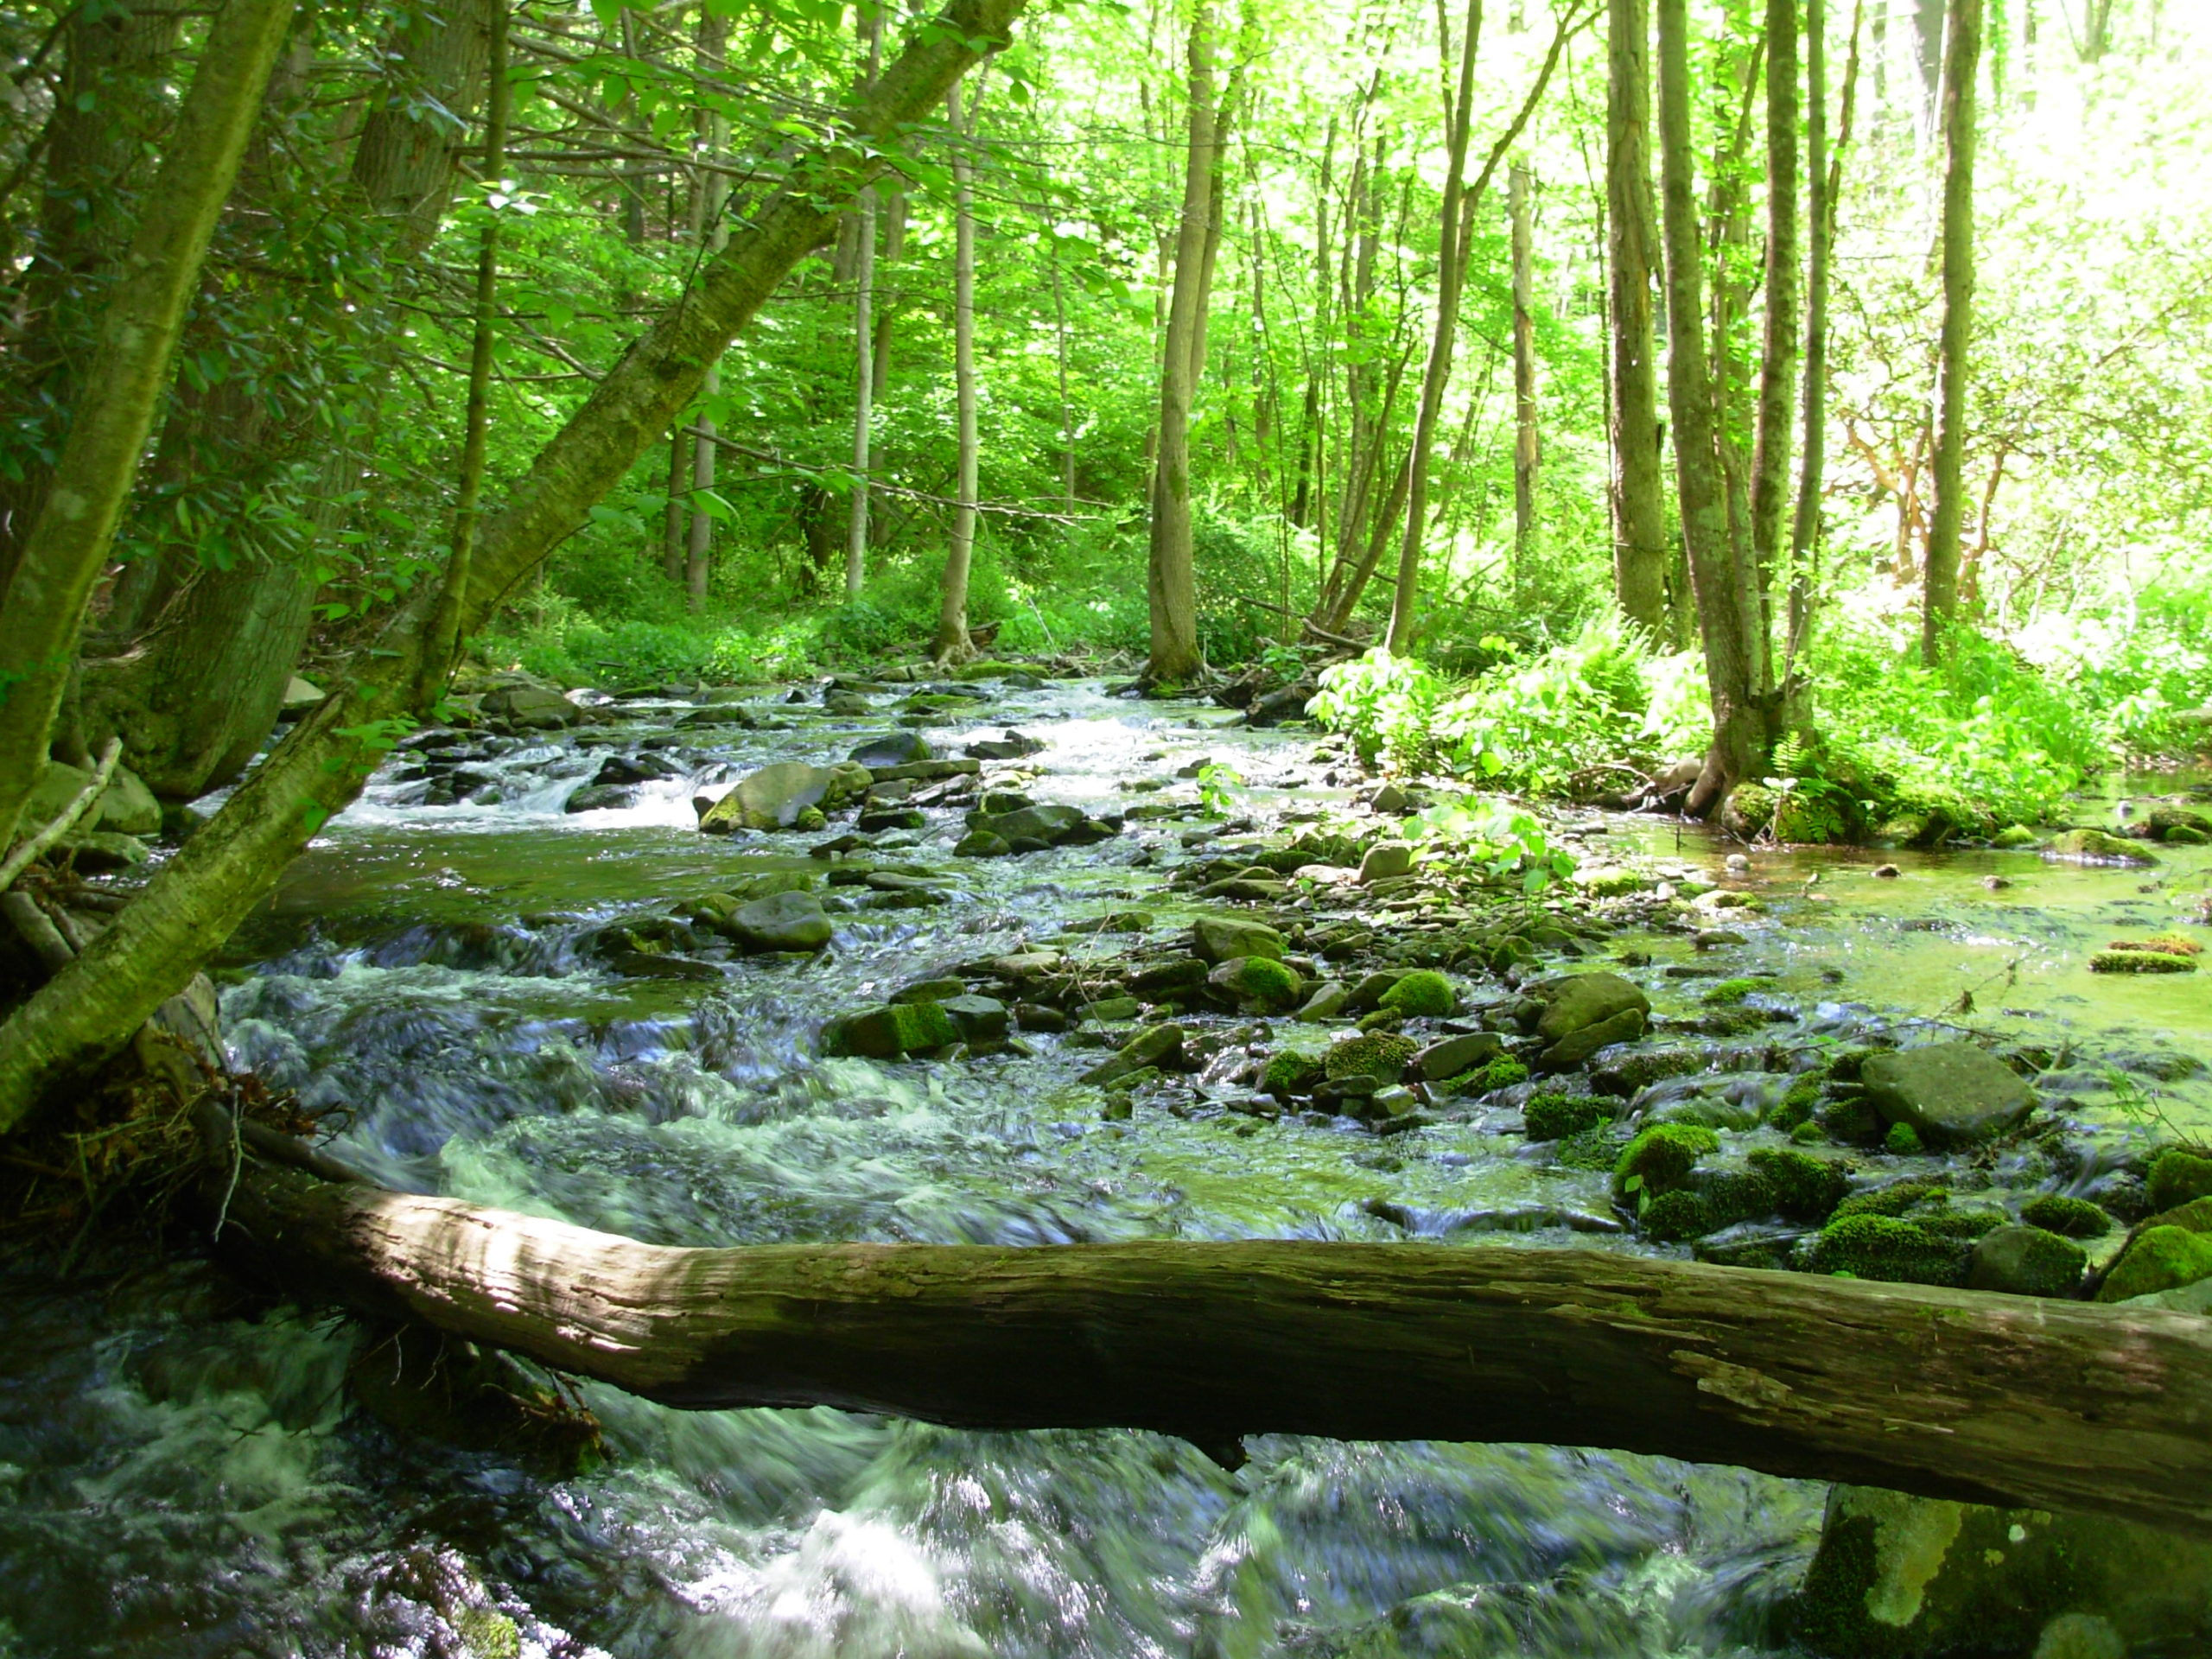 A wooded rocky stream with a tree down across it